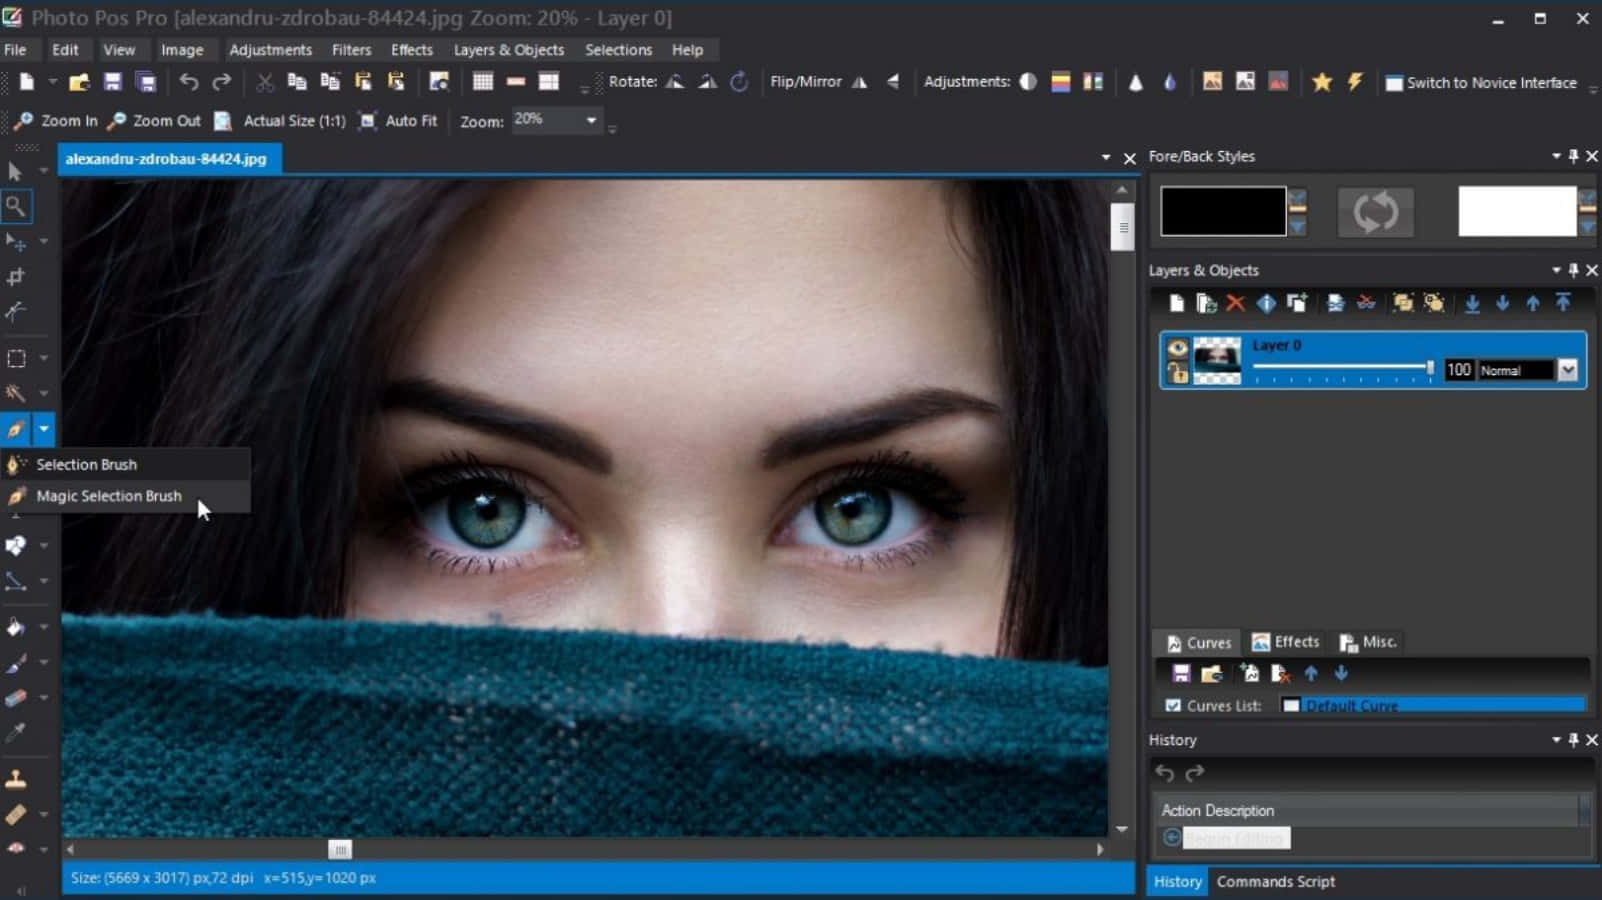 Improve and Perfect Your Images with Photo Editing